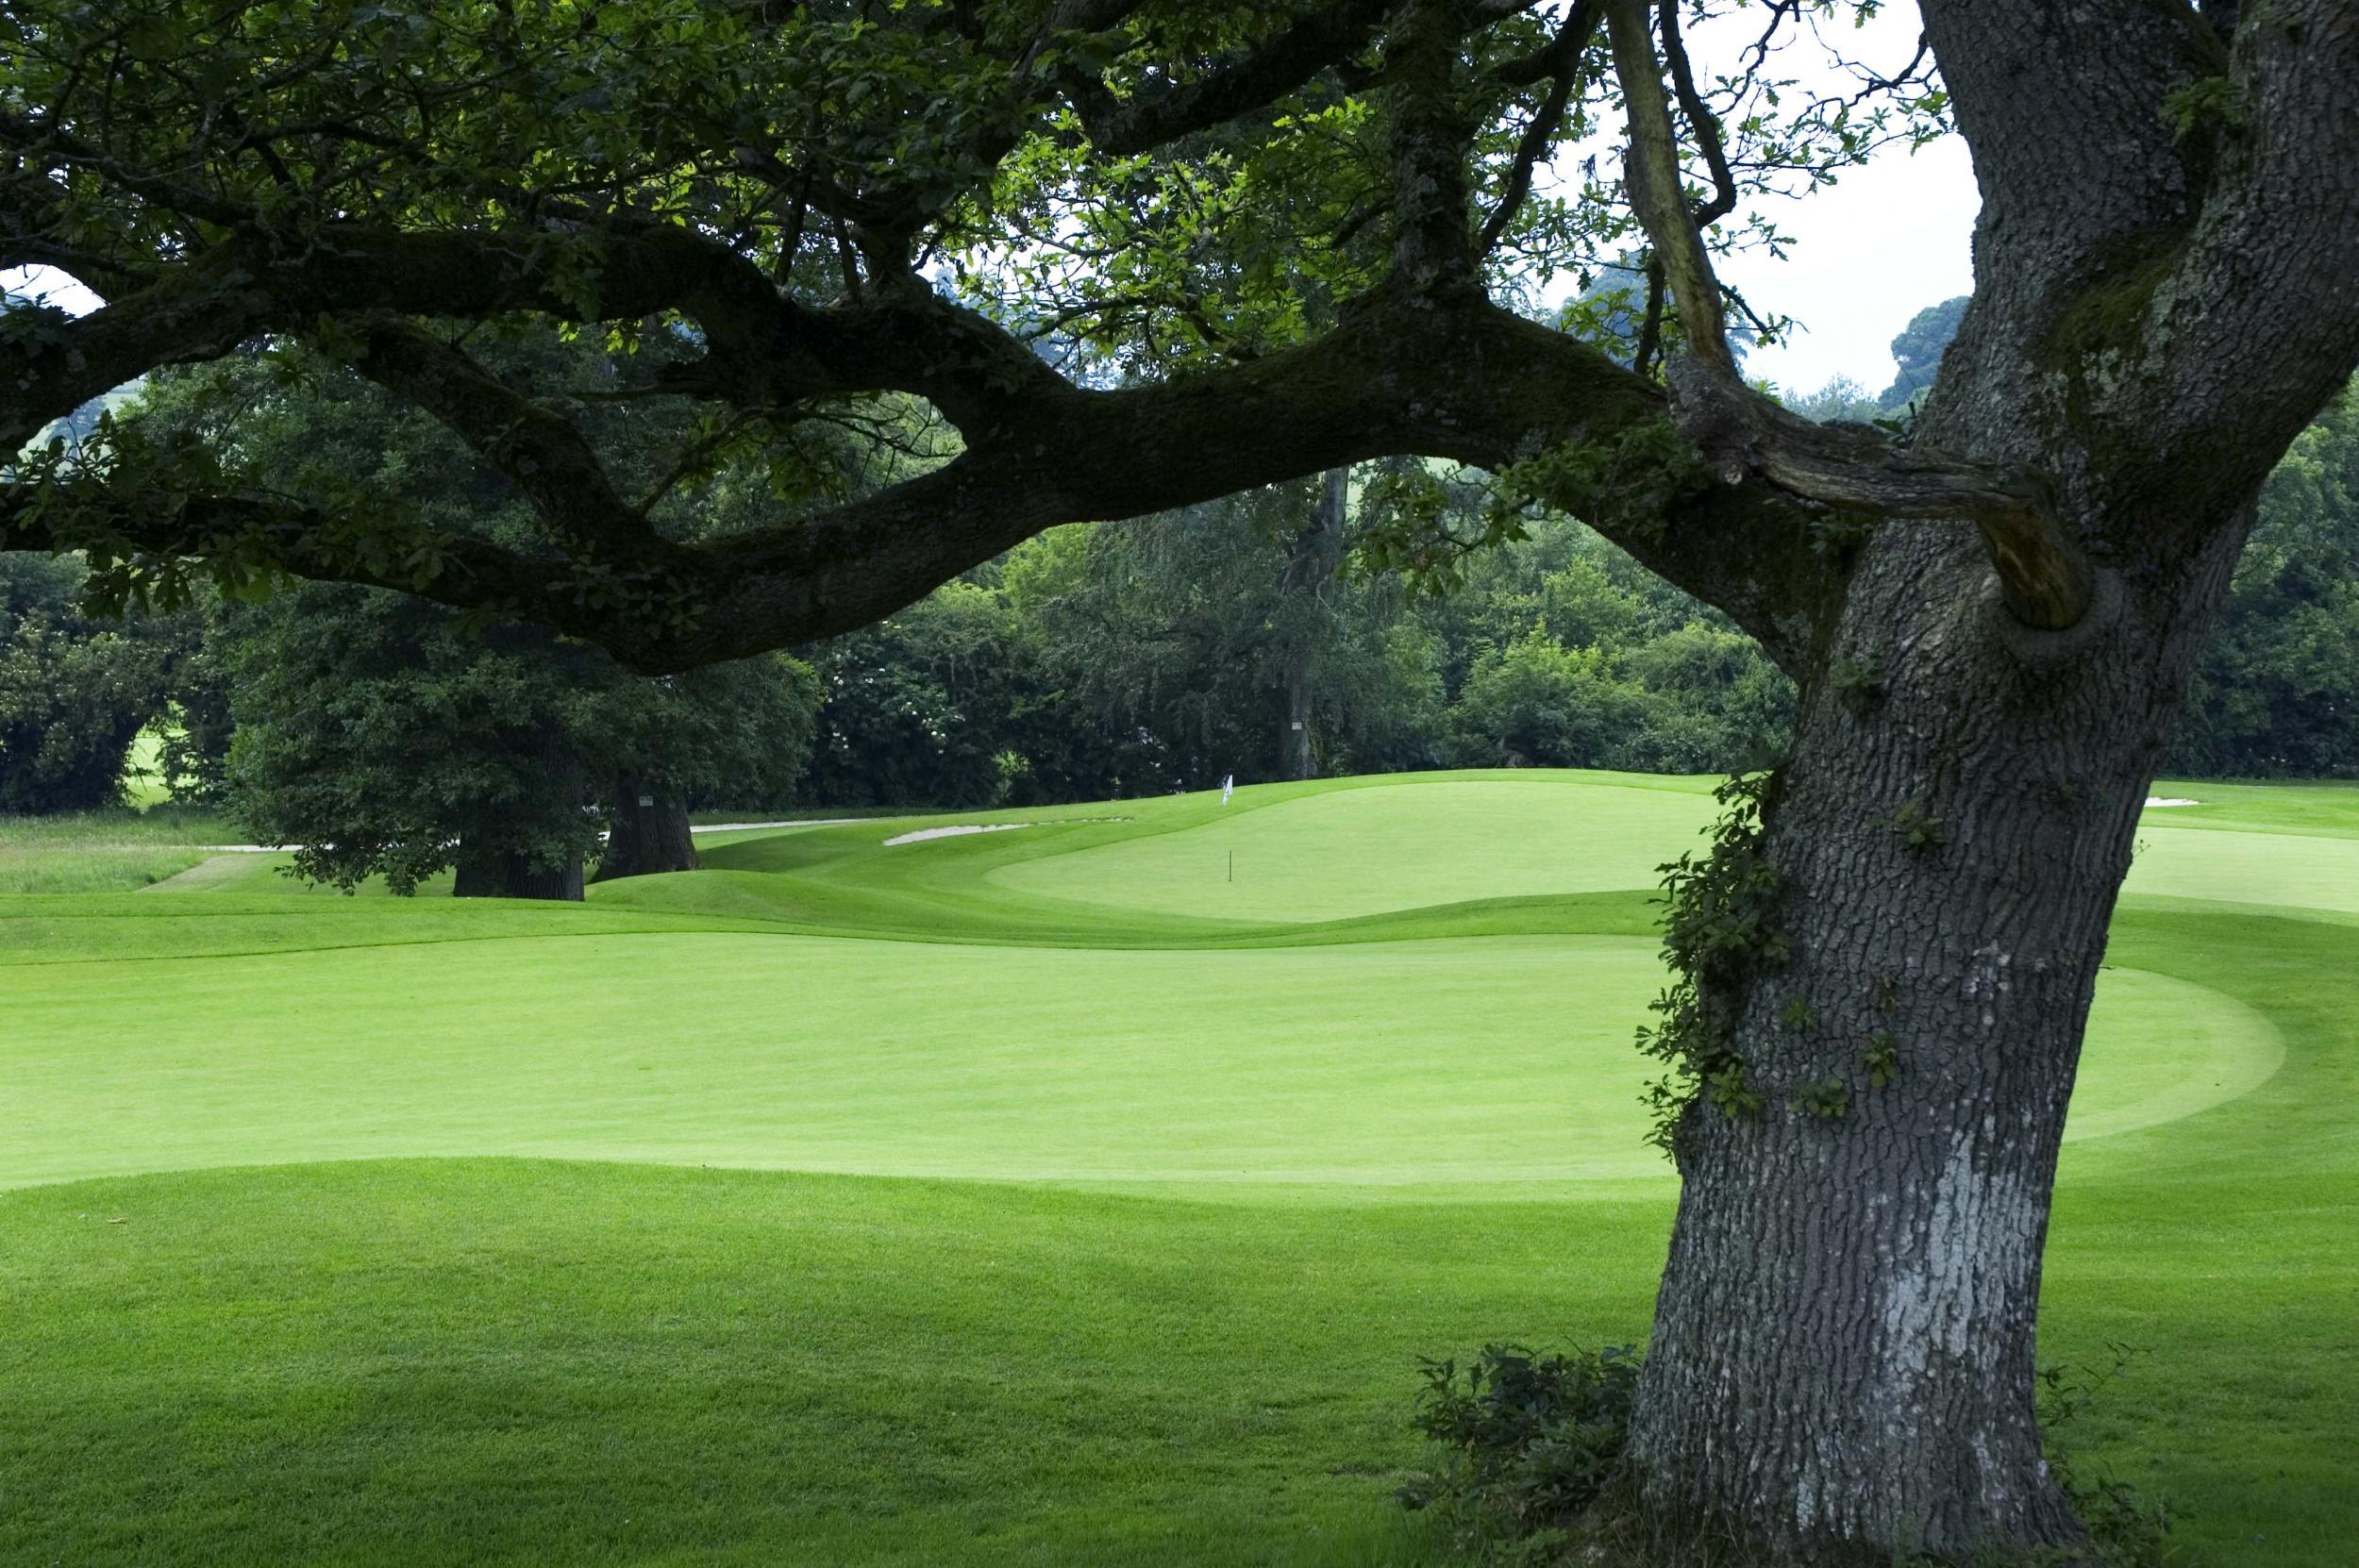 Enjoy some of Ireland’s best bunkering with 270 acres of parkland to play in